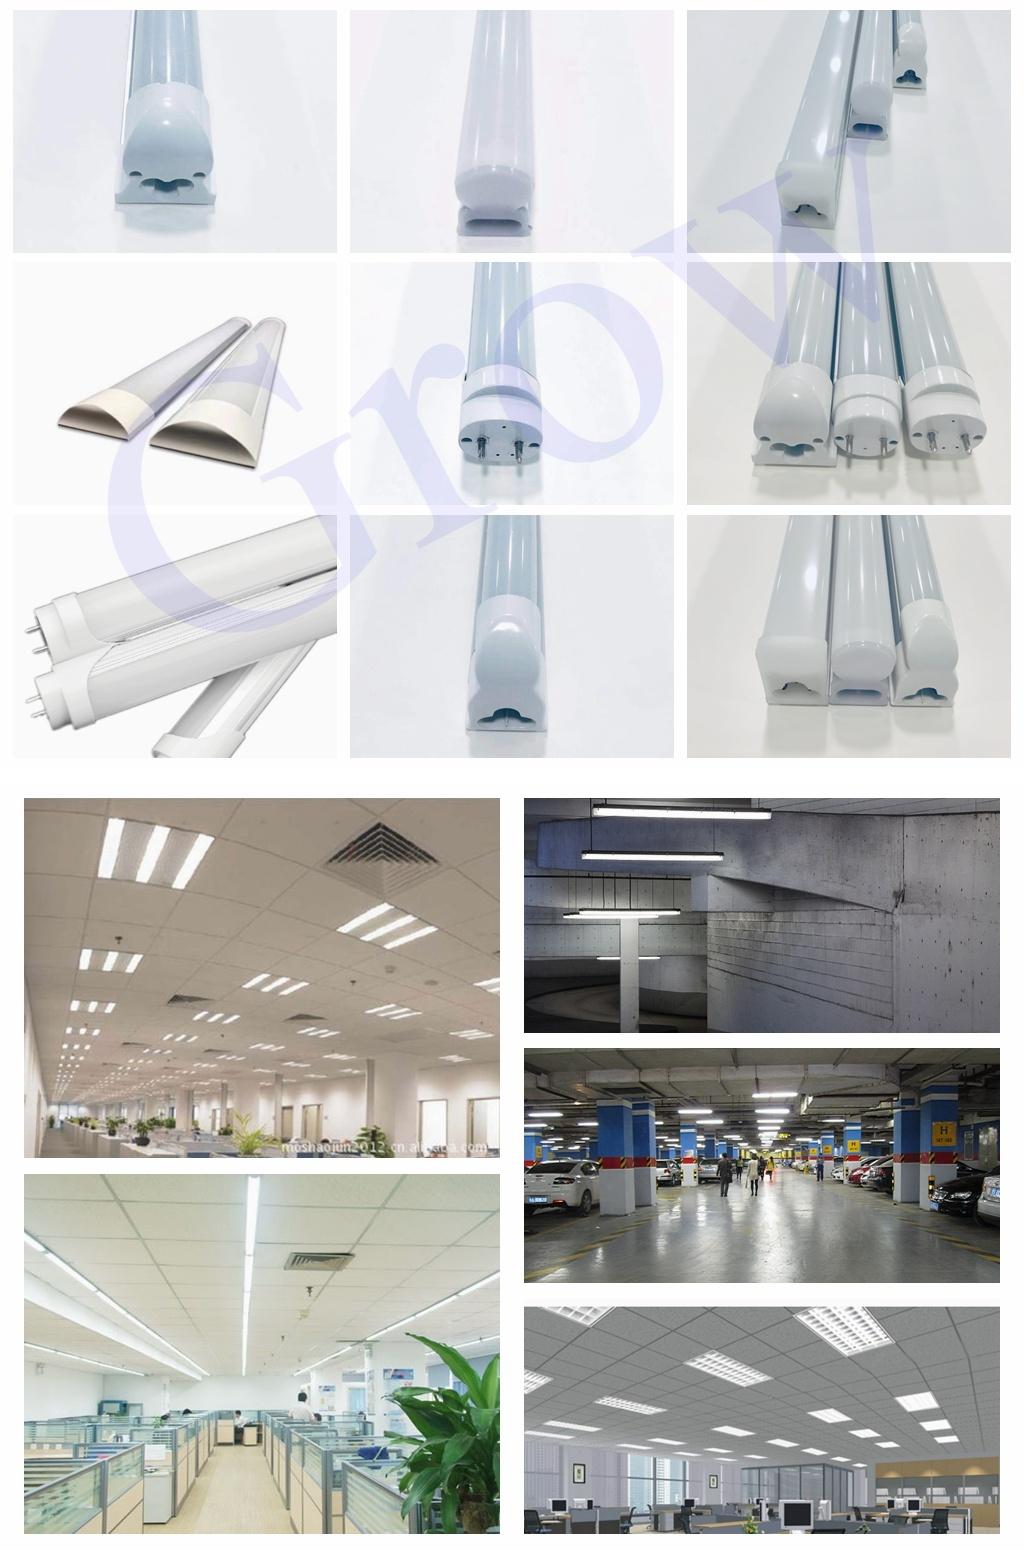 Energy Saving Lamp LED Tube T8 with High Power 18W-72W for Indoor Industrial Lighting